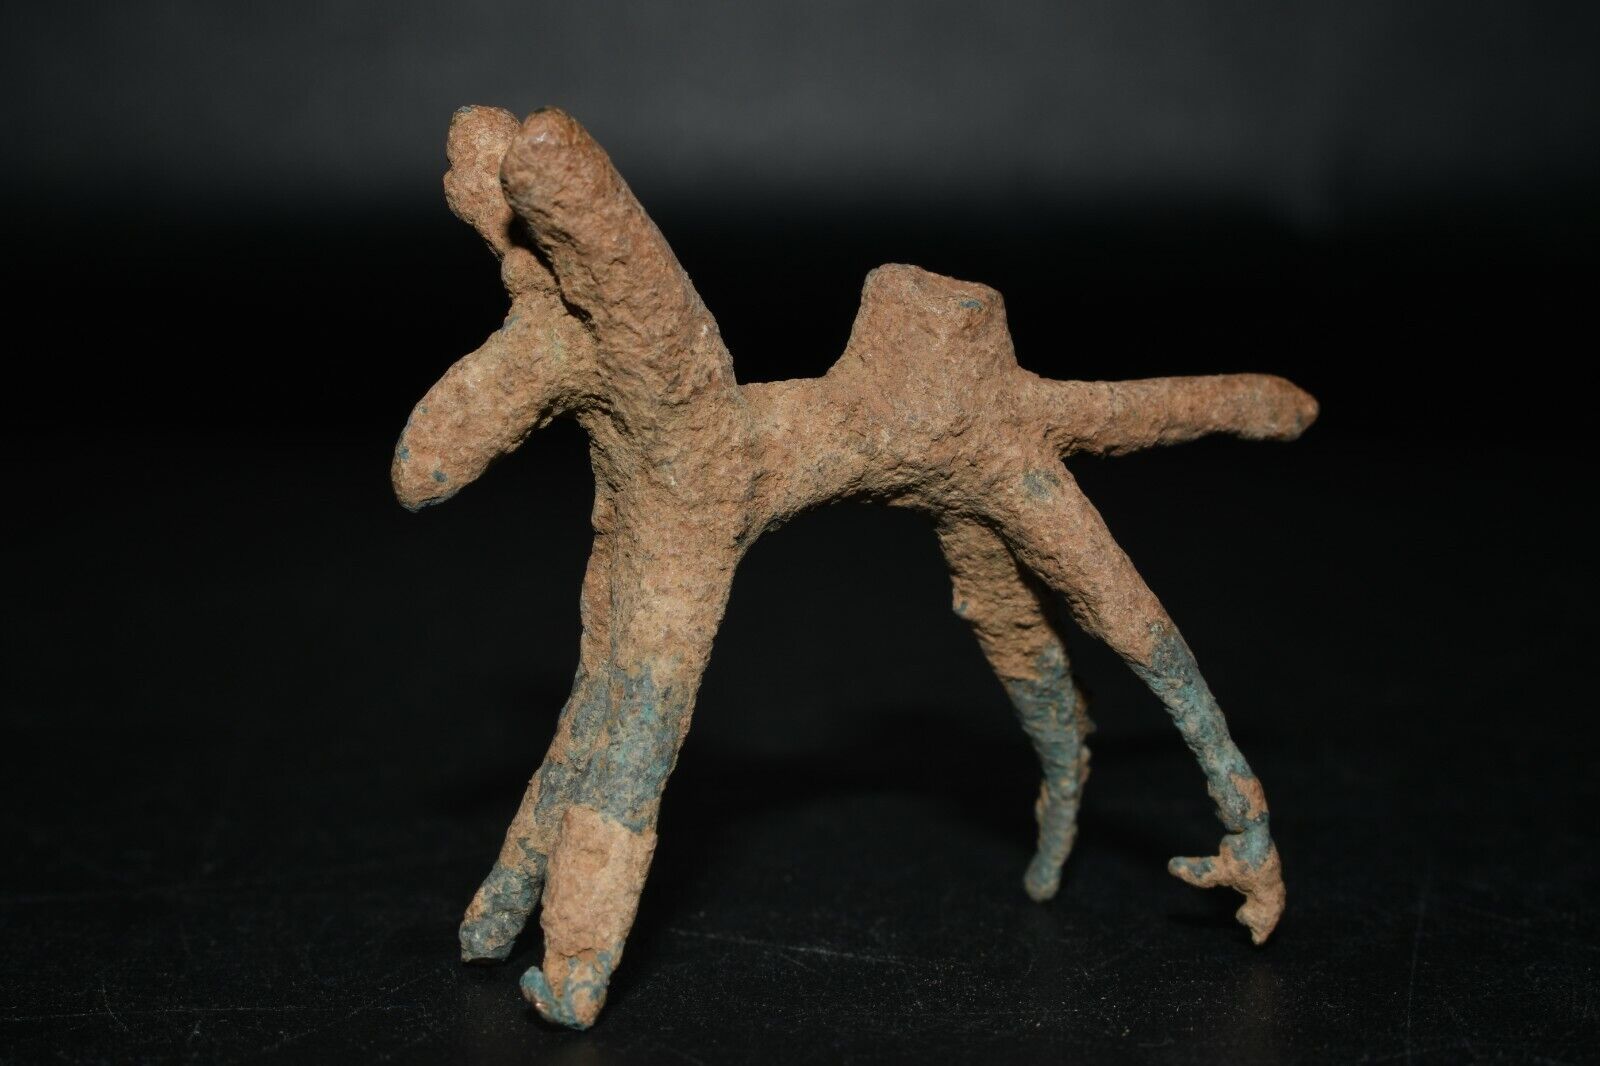 Antique Central Asian Lorestan Bronze Figurine in Form of an Animal C. 800 BC